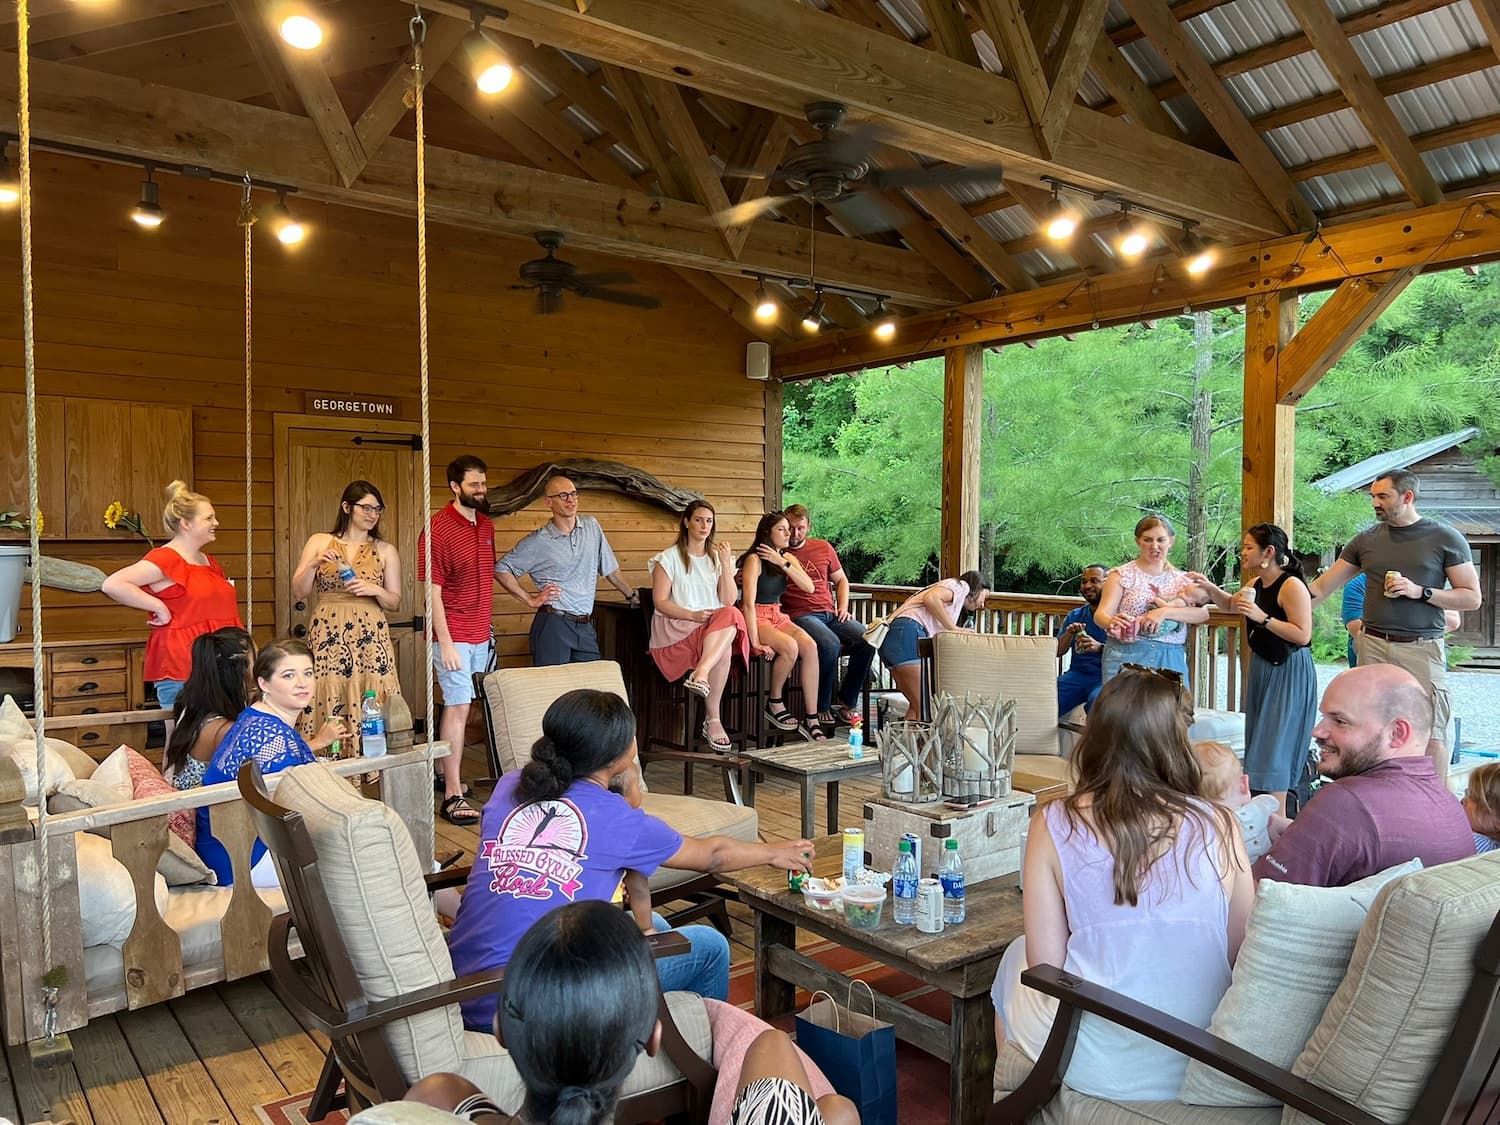 Med-Peds students at an outdoor party on a porch with rustic decor.